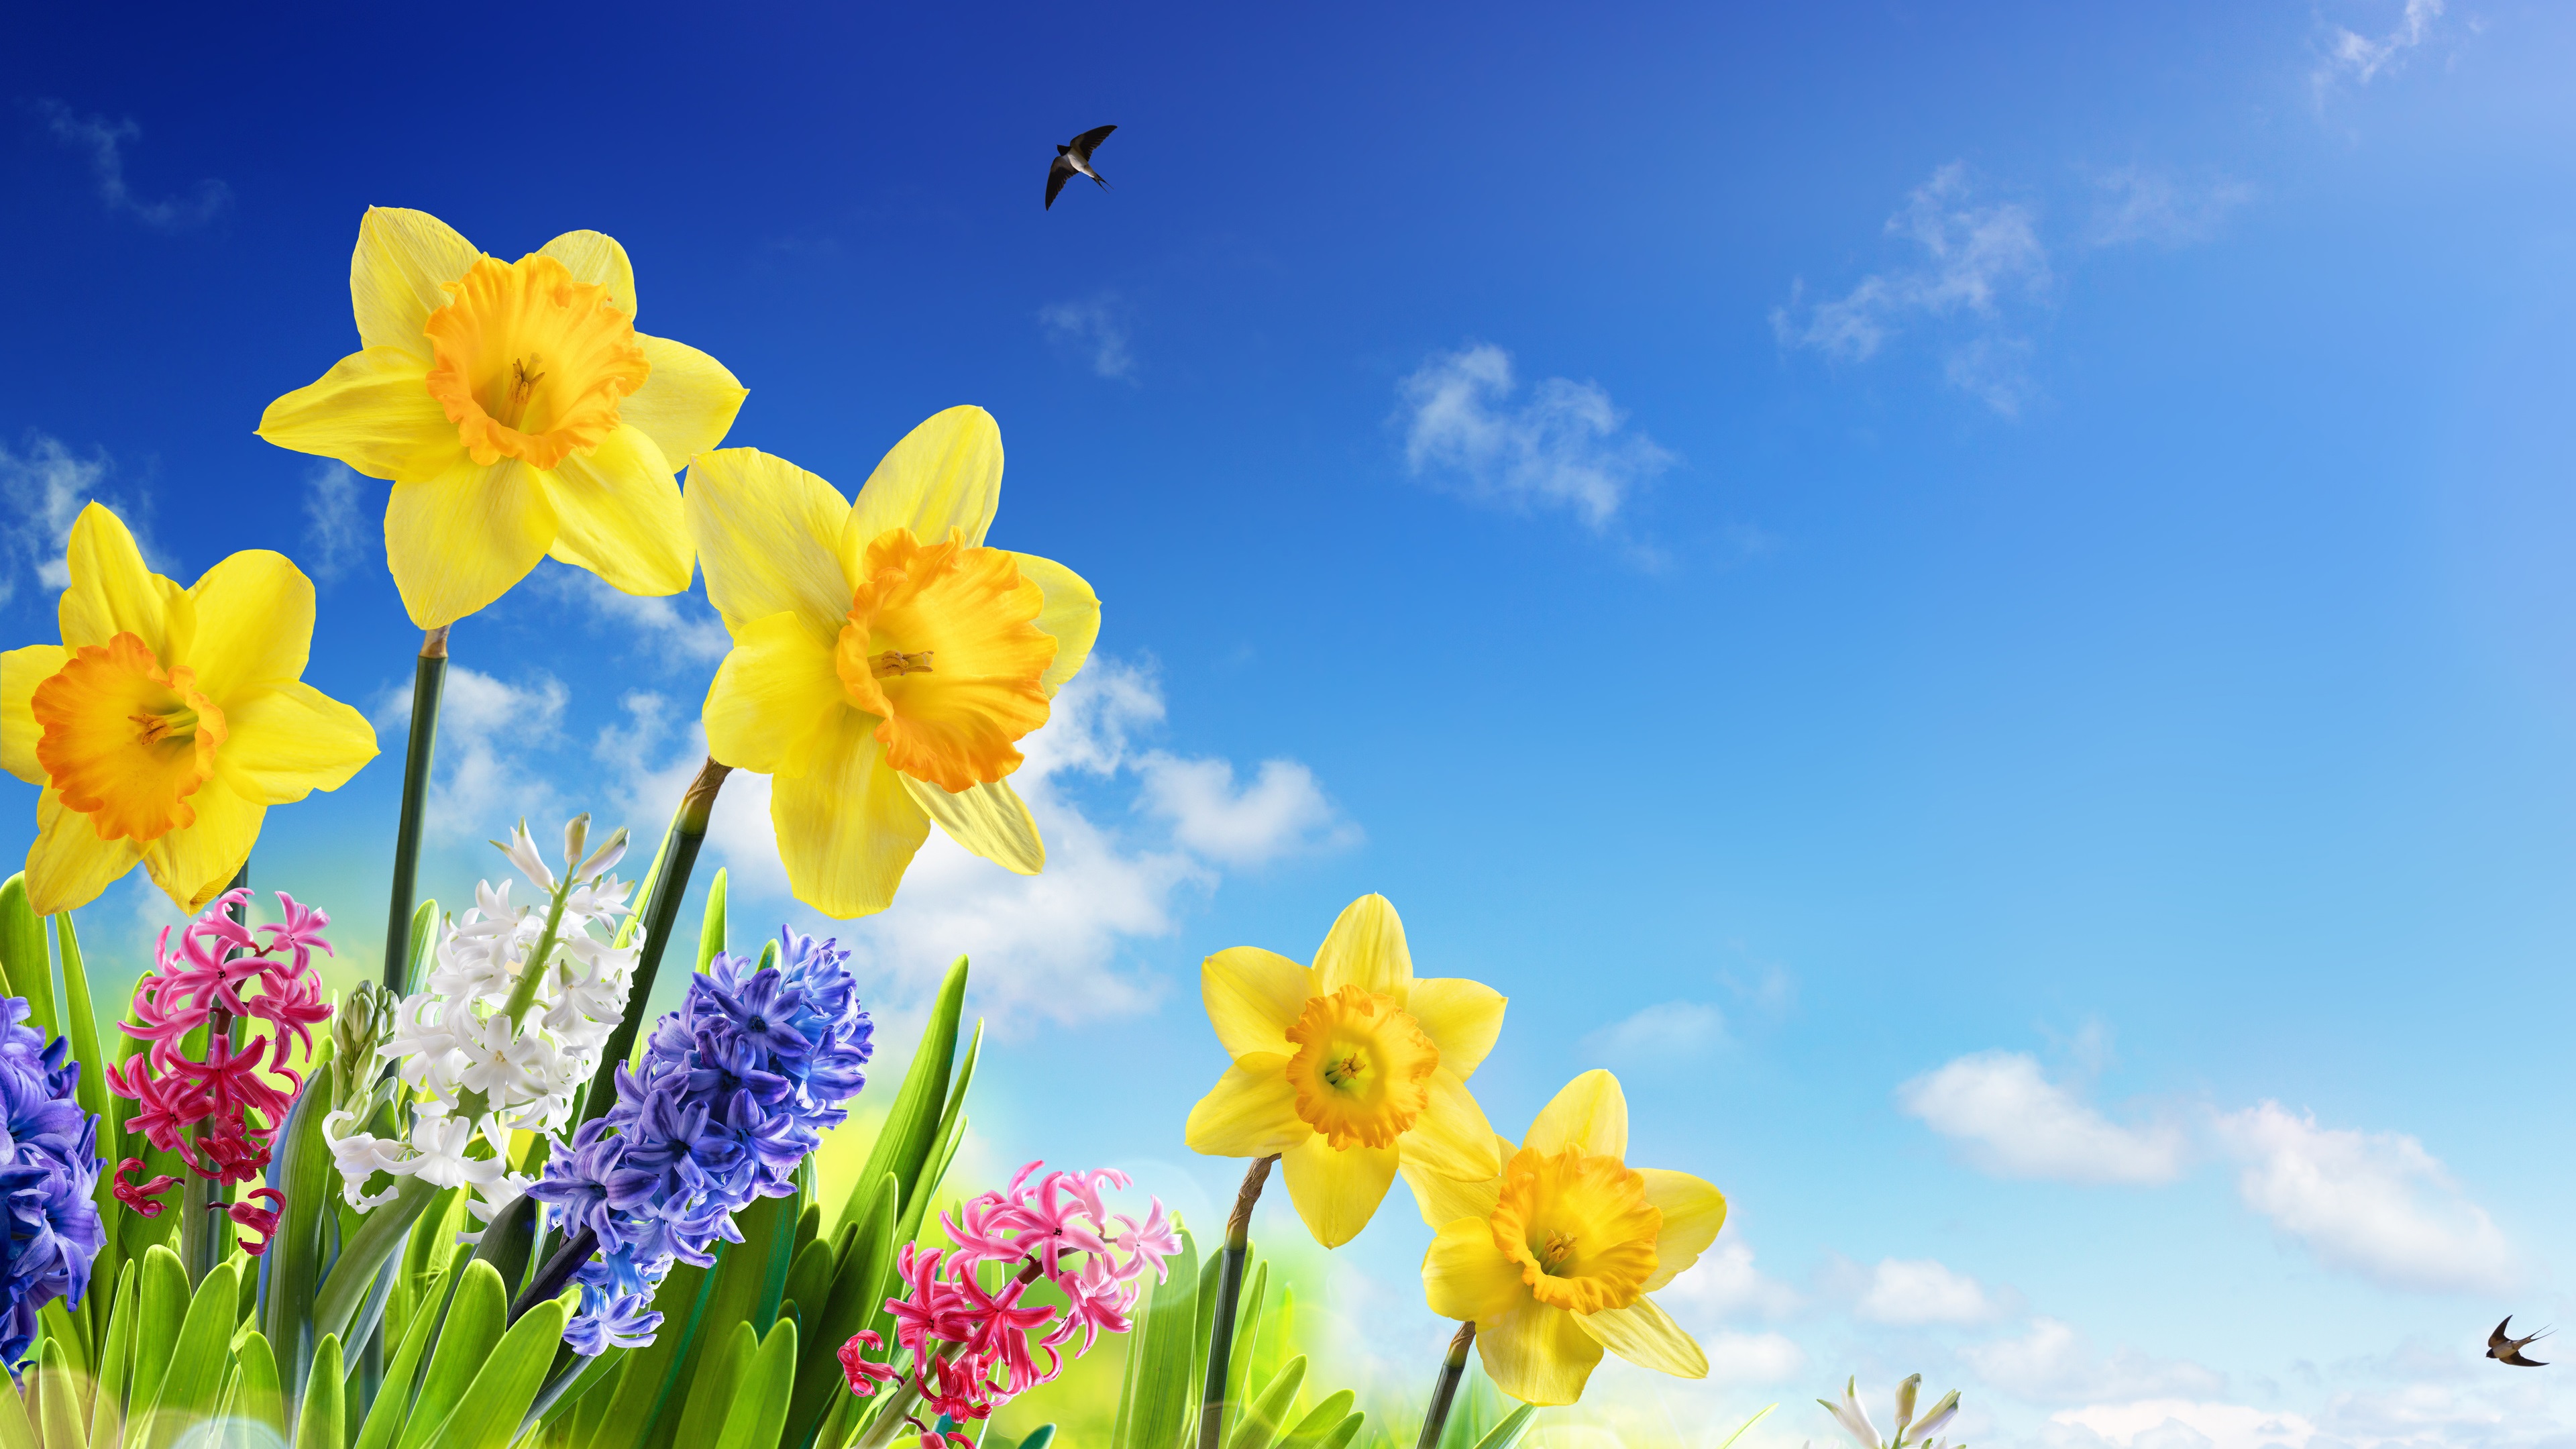 Wallpaper Yellow daffodils, hyacinth, colorful flowers, swallows, blue sky, spring 3840x2160 UHD 4K Picture, Image